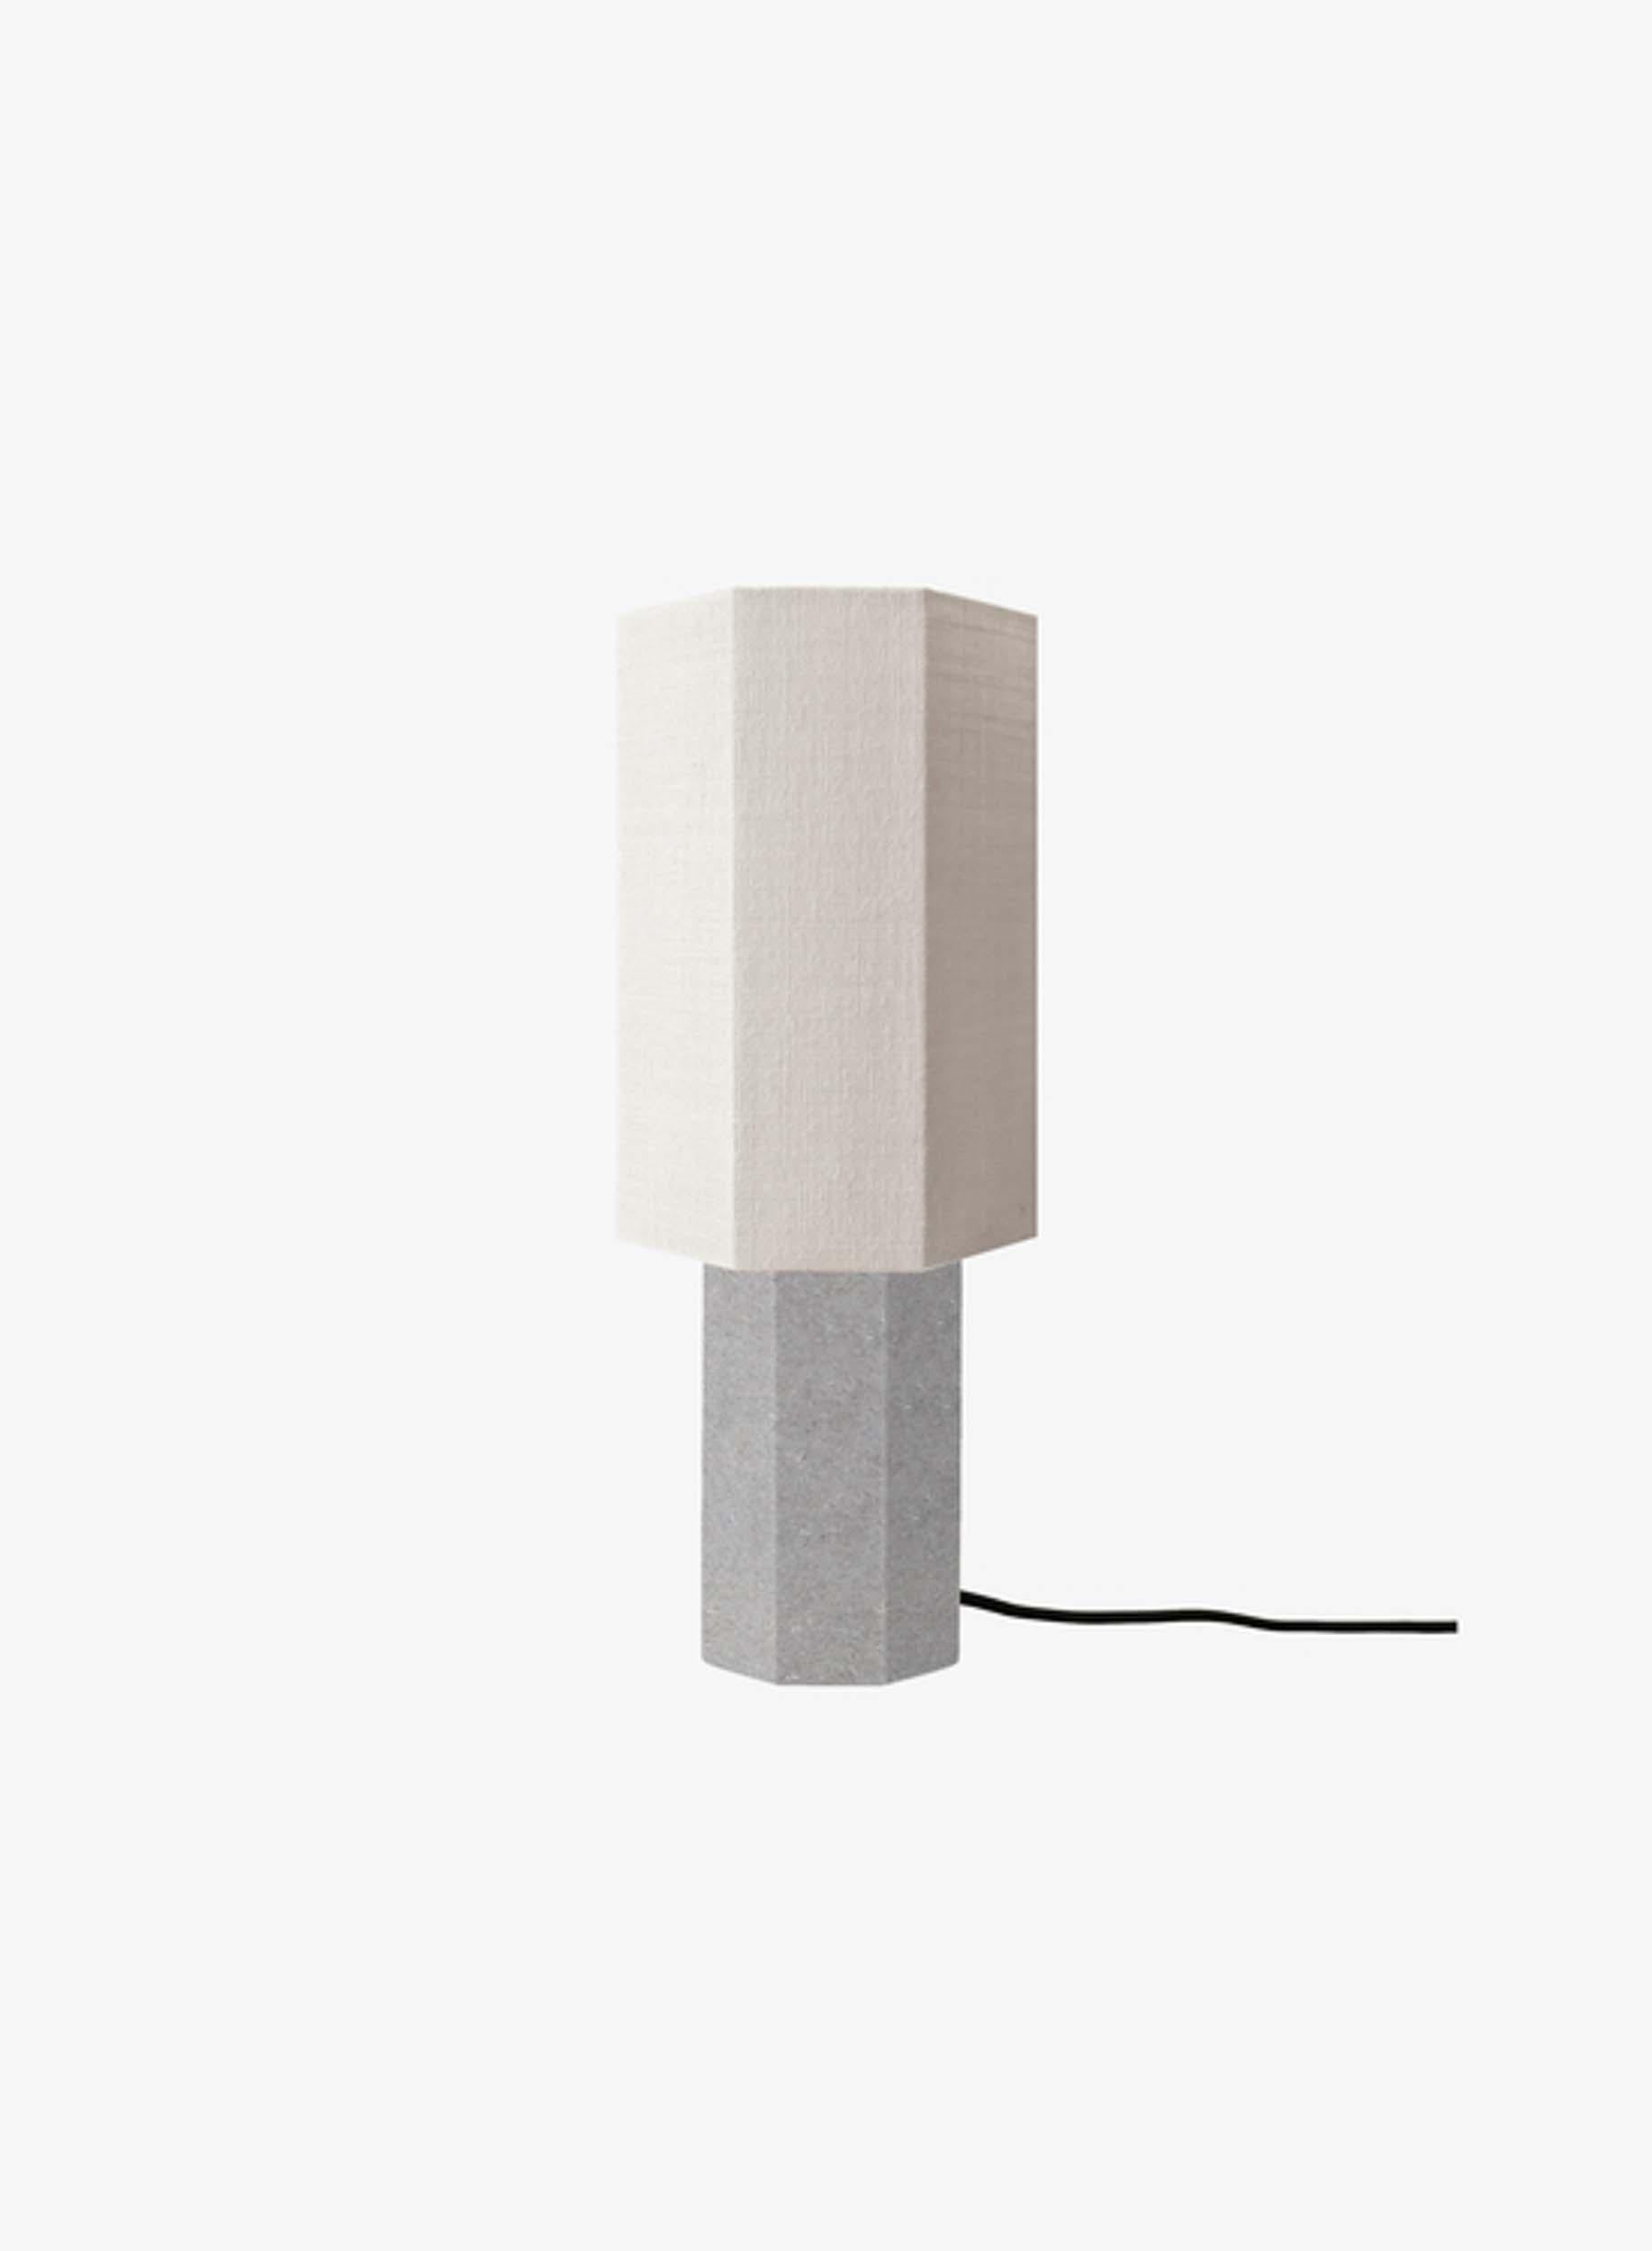 Table Lamp 'The Eight over Eight' by Louise Roe 

Designed in Denmark and manufactured in Italy.

Model shown in the picture: 
Base: Grey marble
Lampshade: white jute 

Dimensions : 
Height: 36 cm
Diameter: 12.5 cm

Louise Roe is a